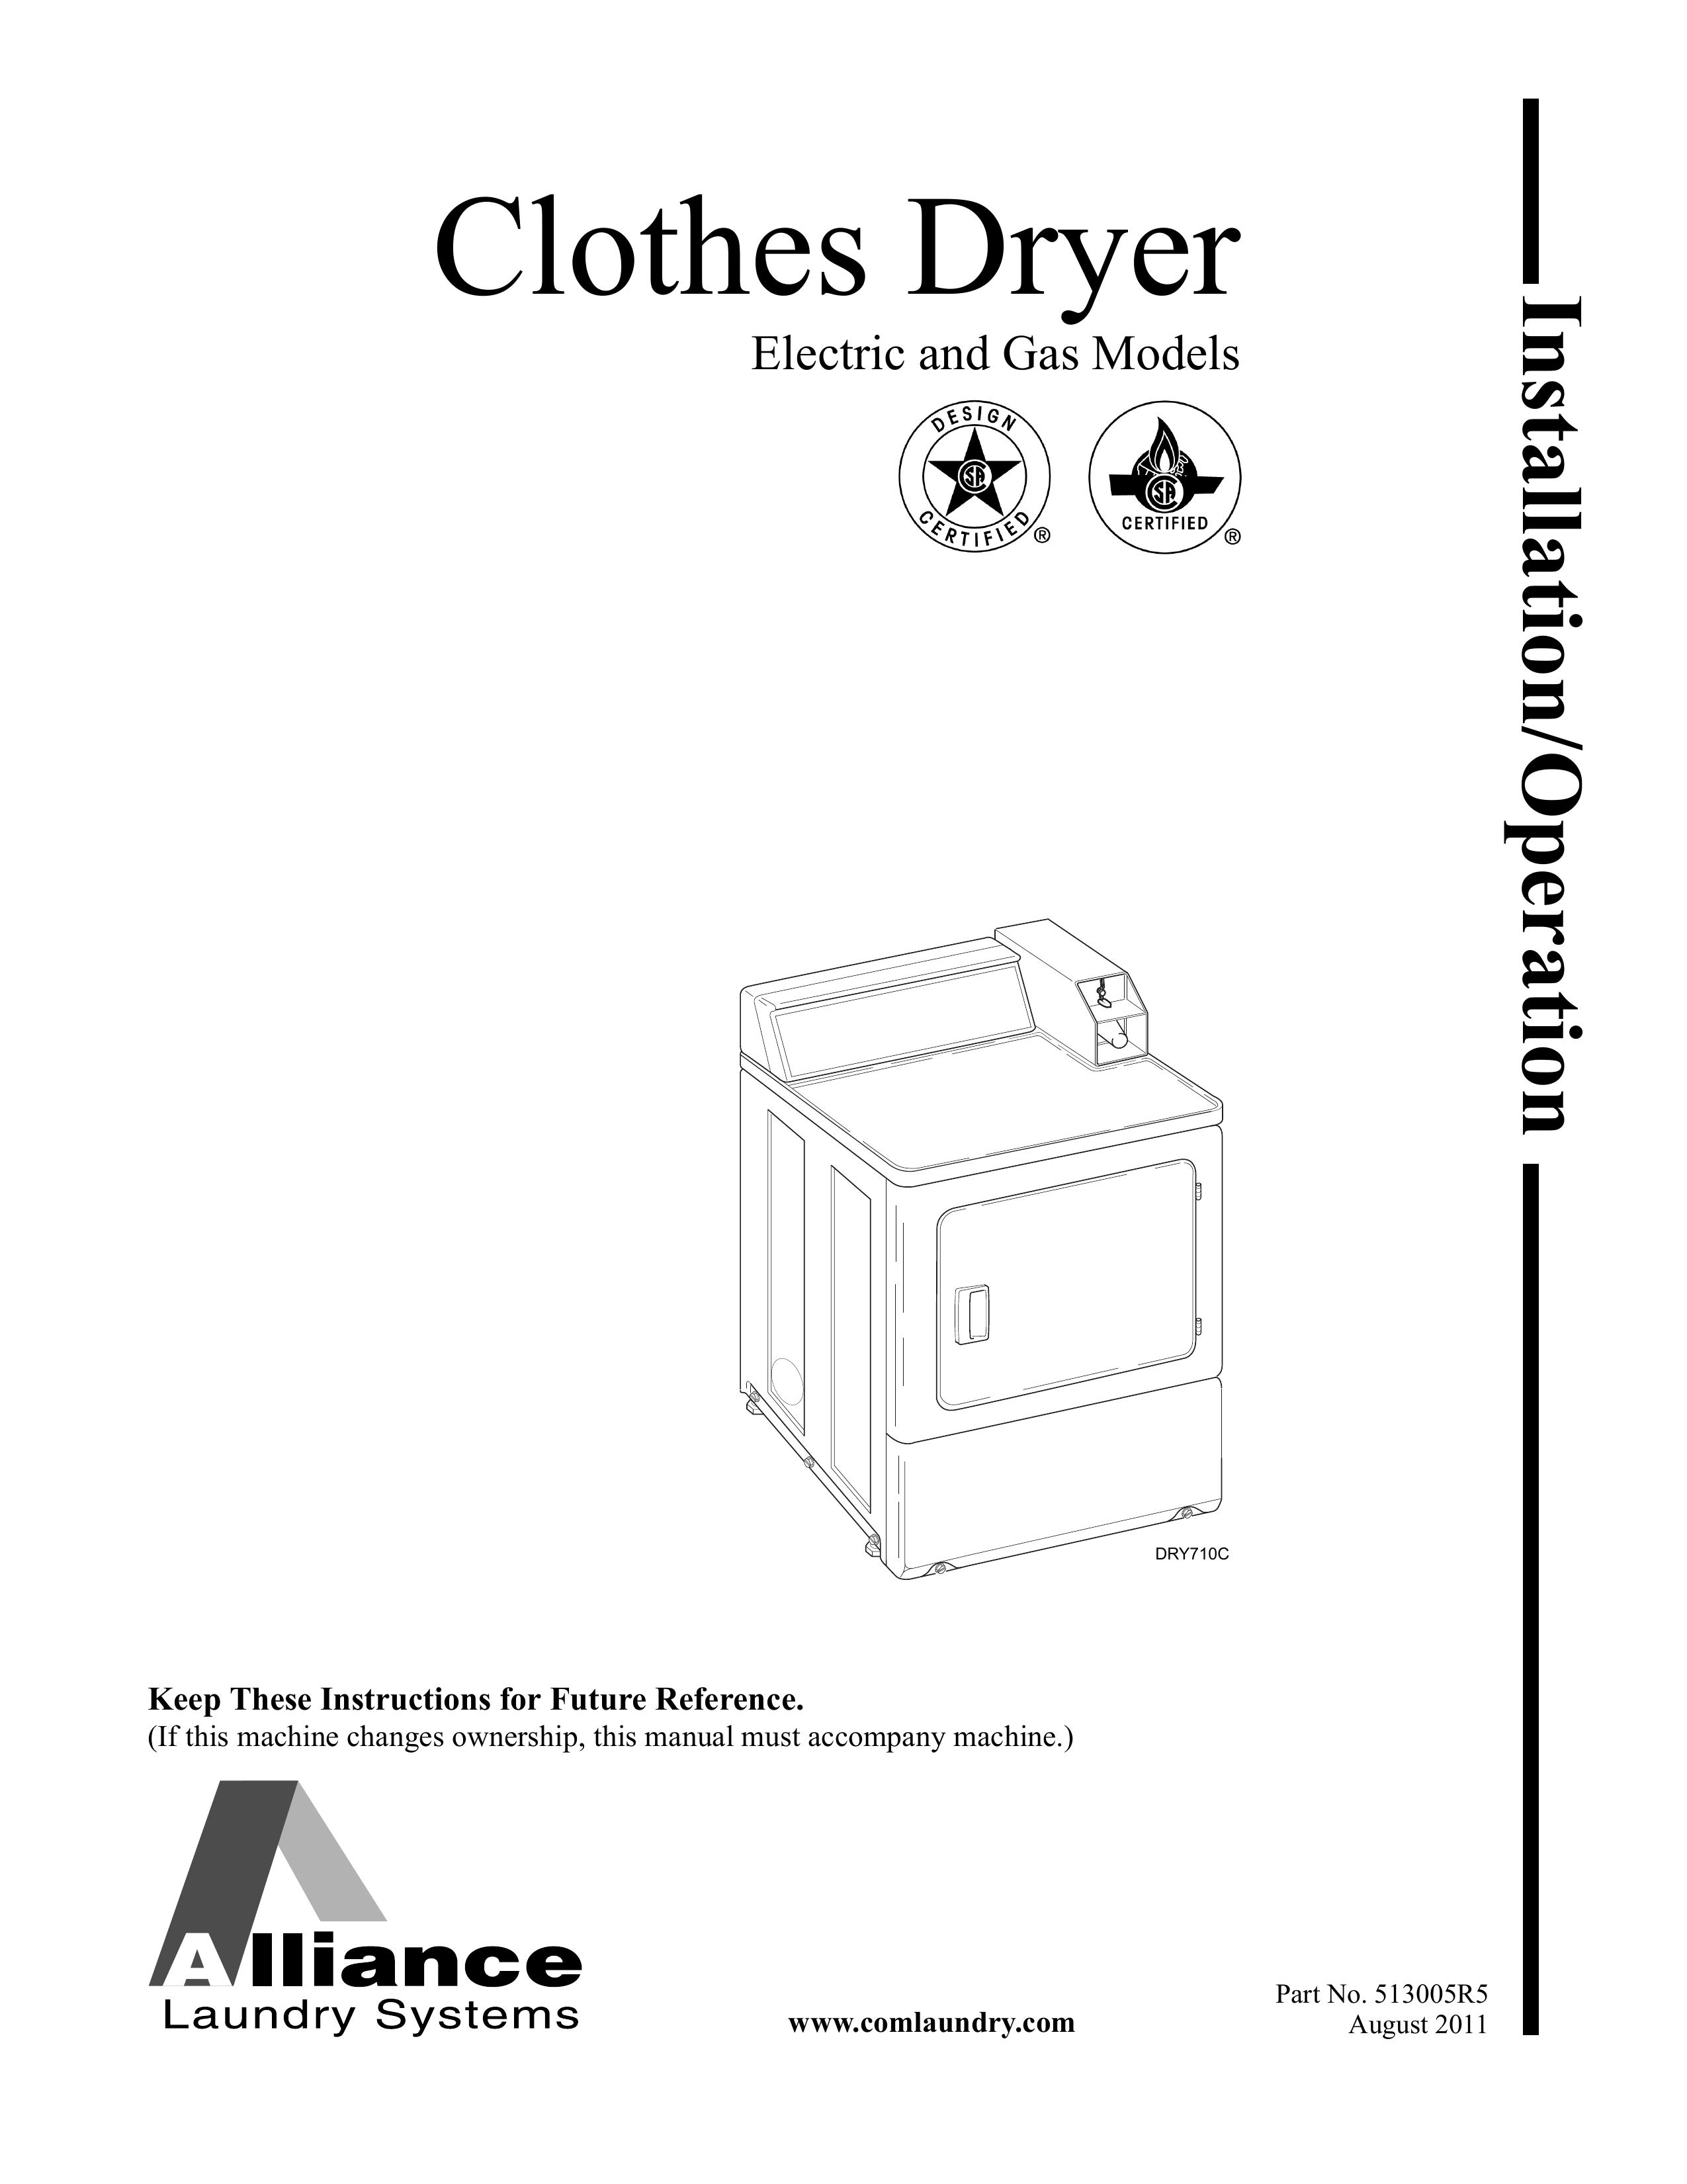 Alliance Laundry Systems DRY710C Clothes Dryer User Manual